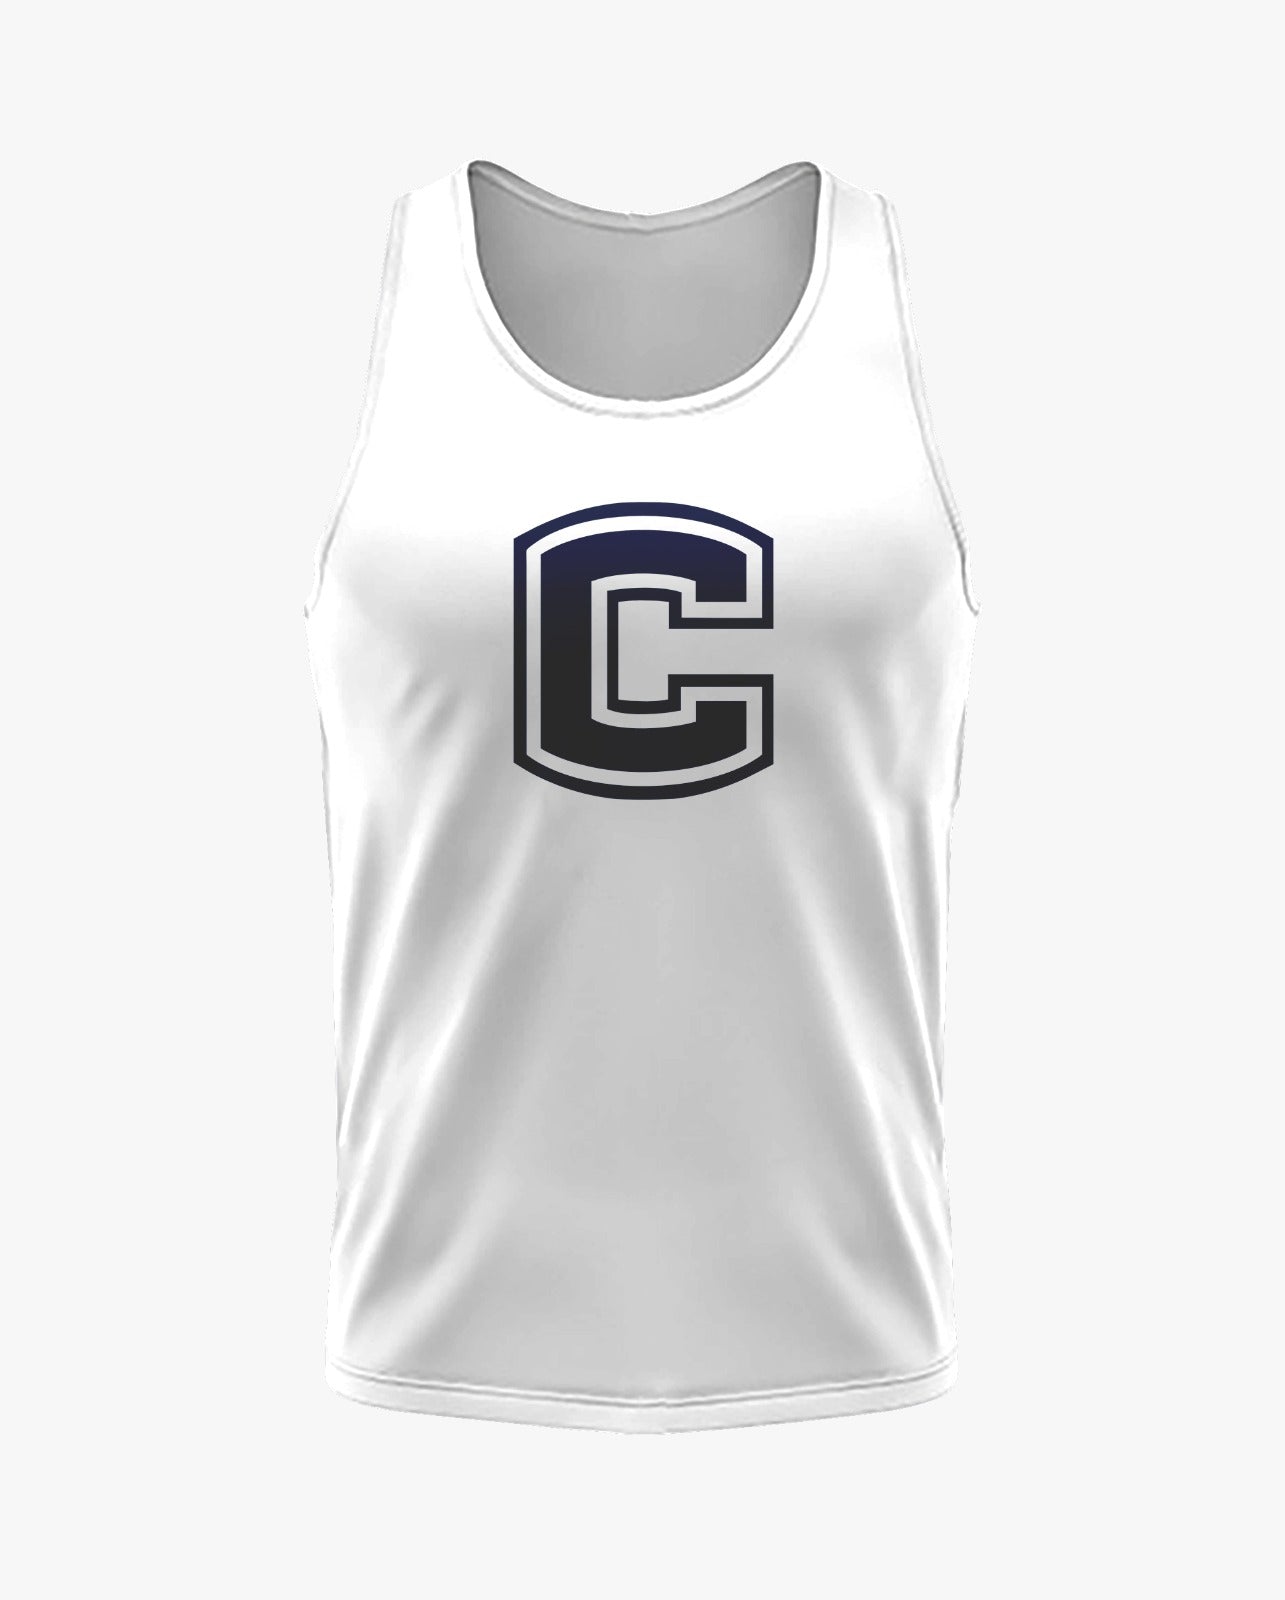 W.T. Chipman Dri Tech Tank Top ~ White C Central "Home of the Spartans"